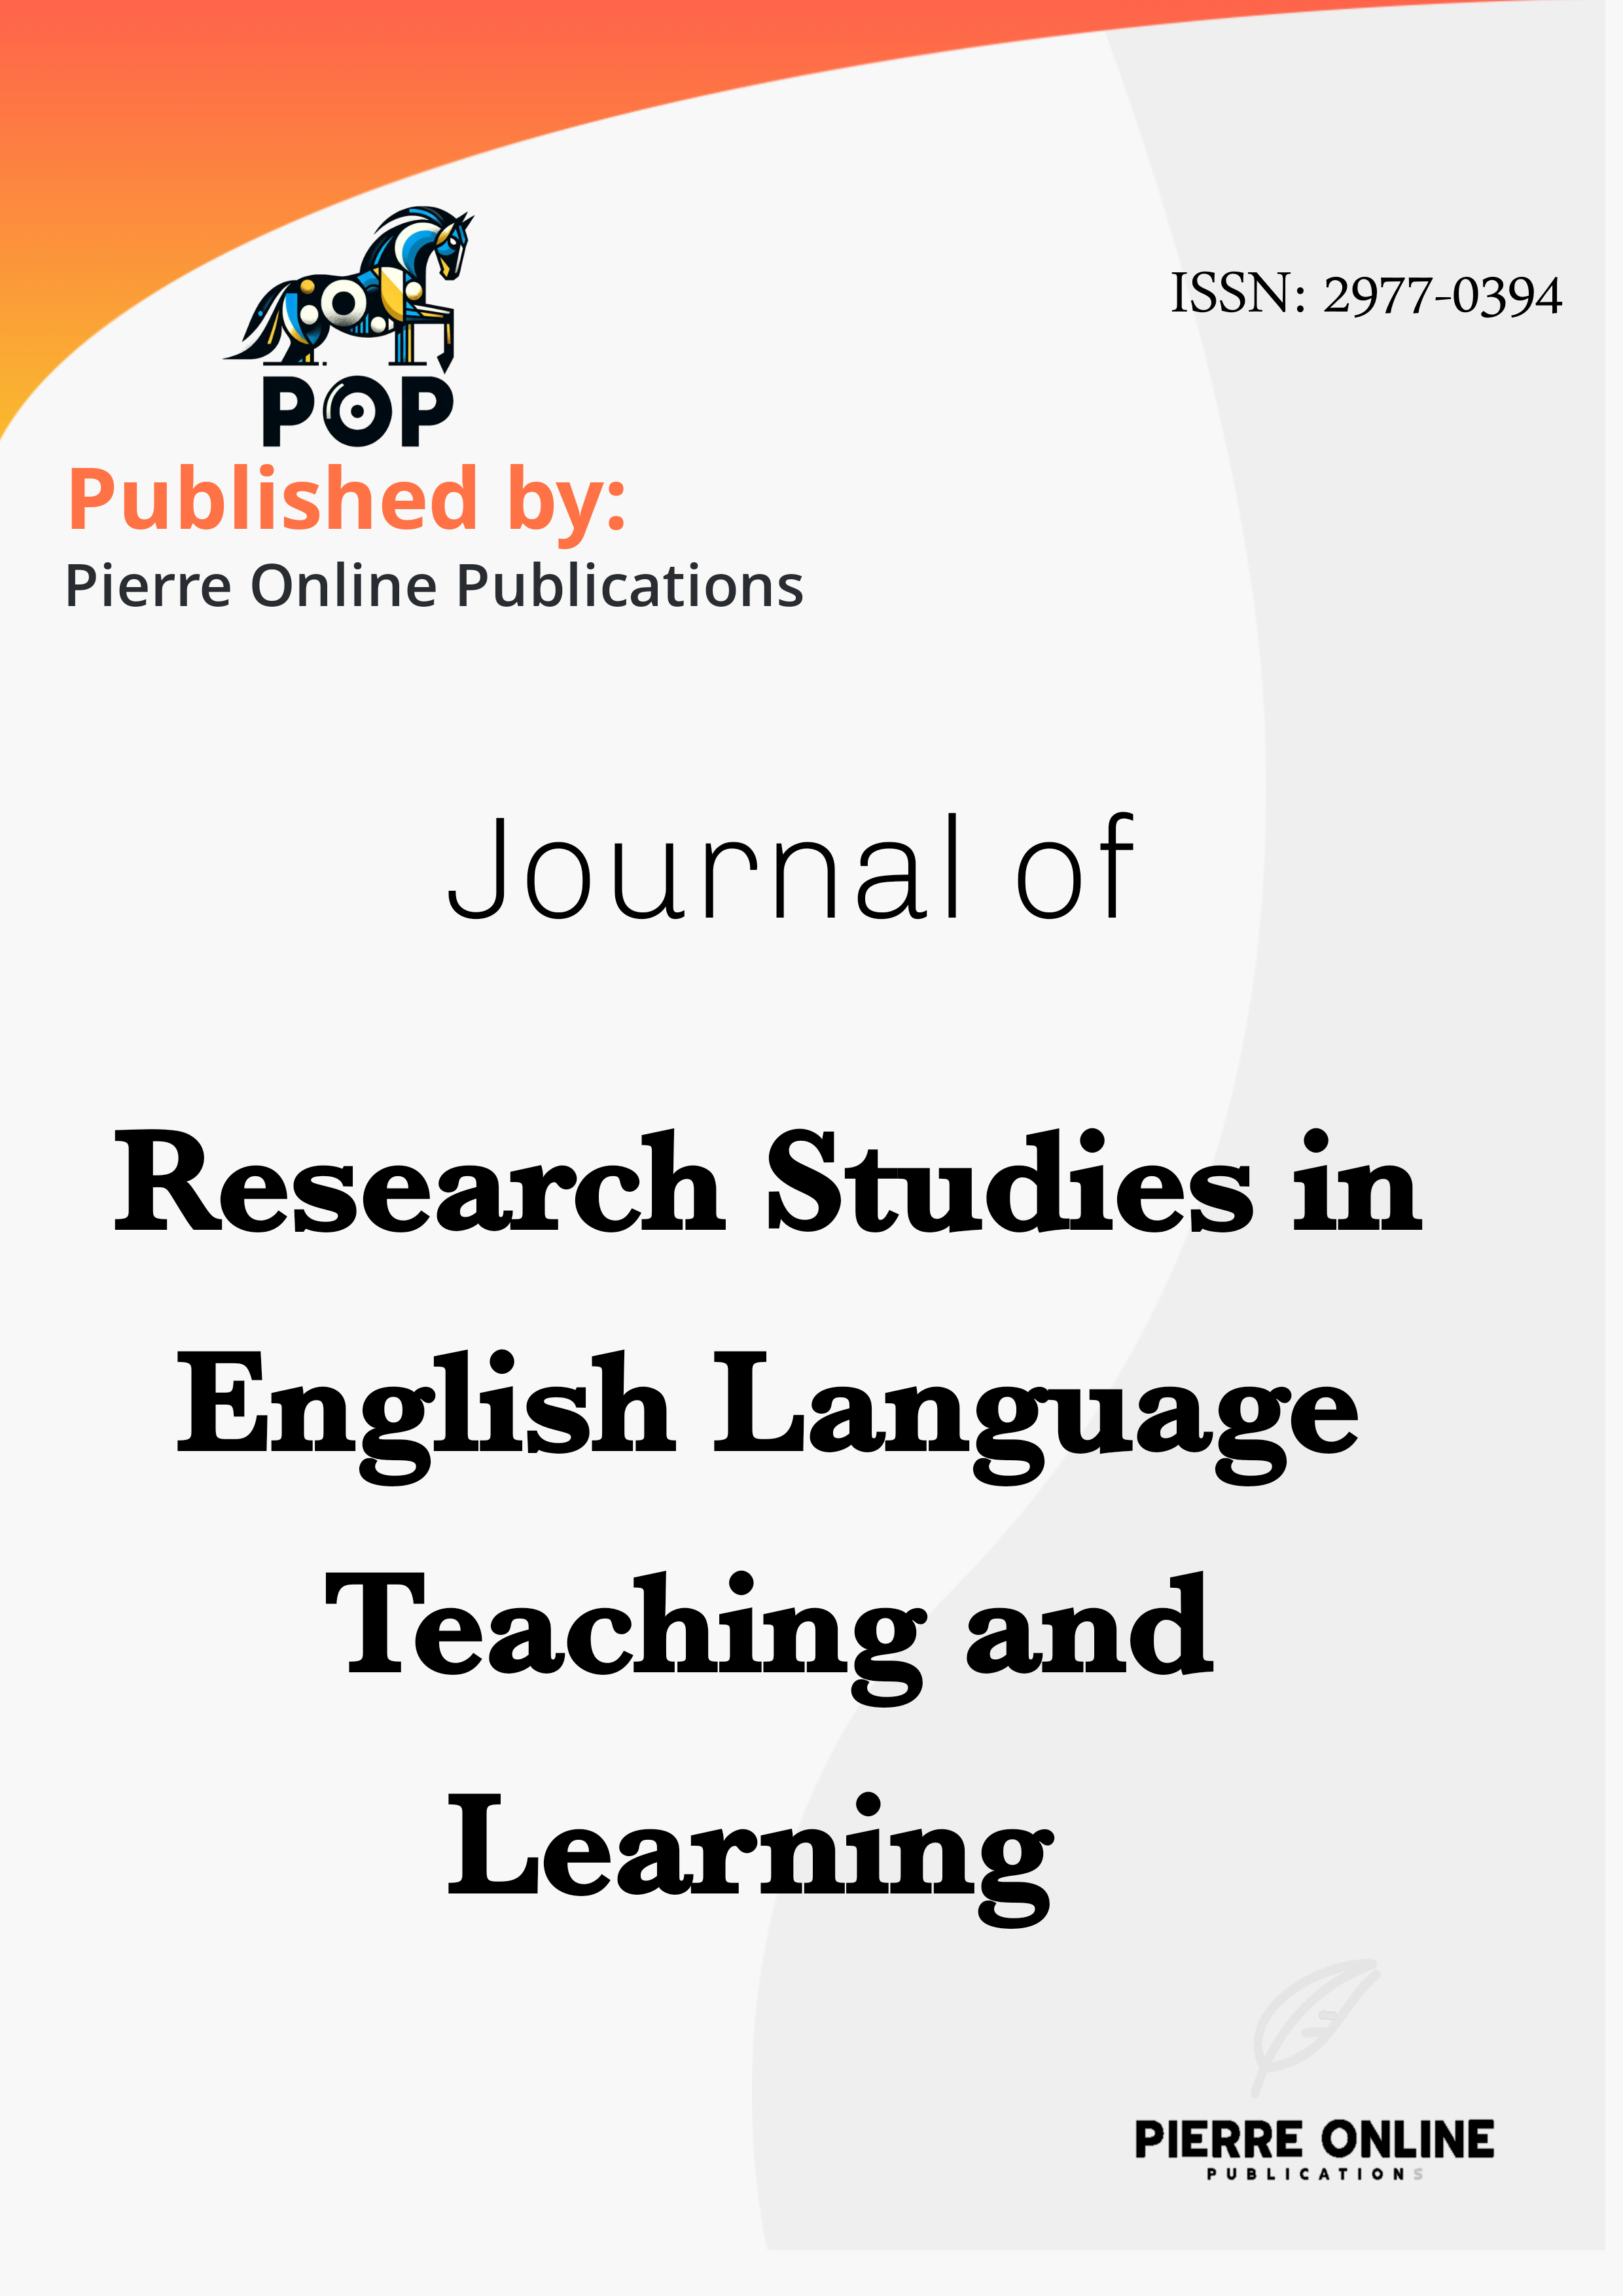 list of research topics in english language teaching